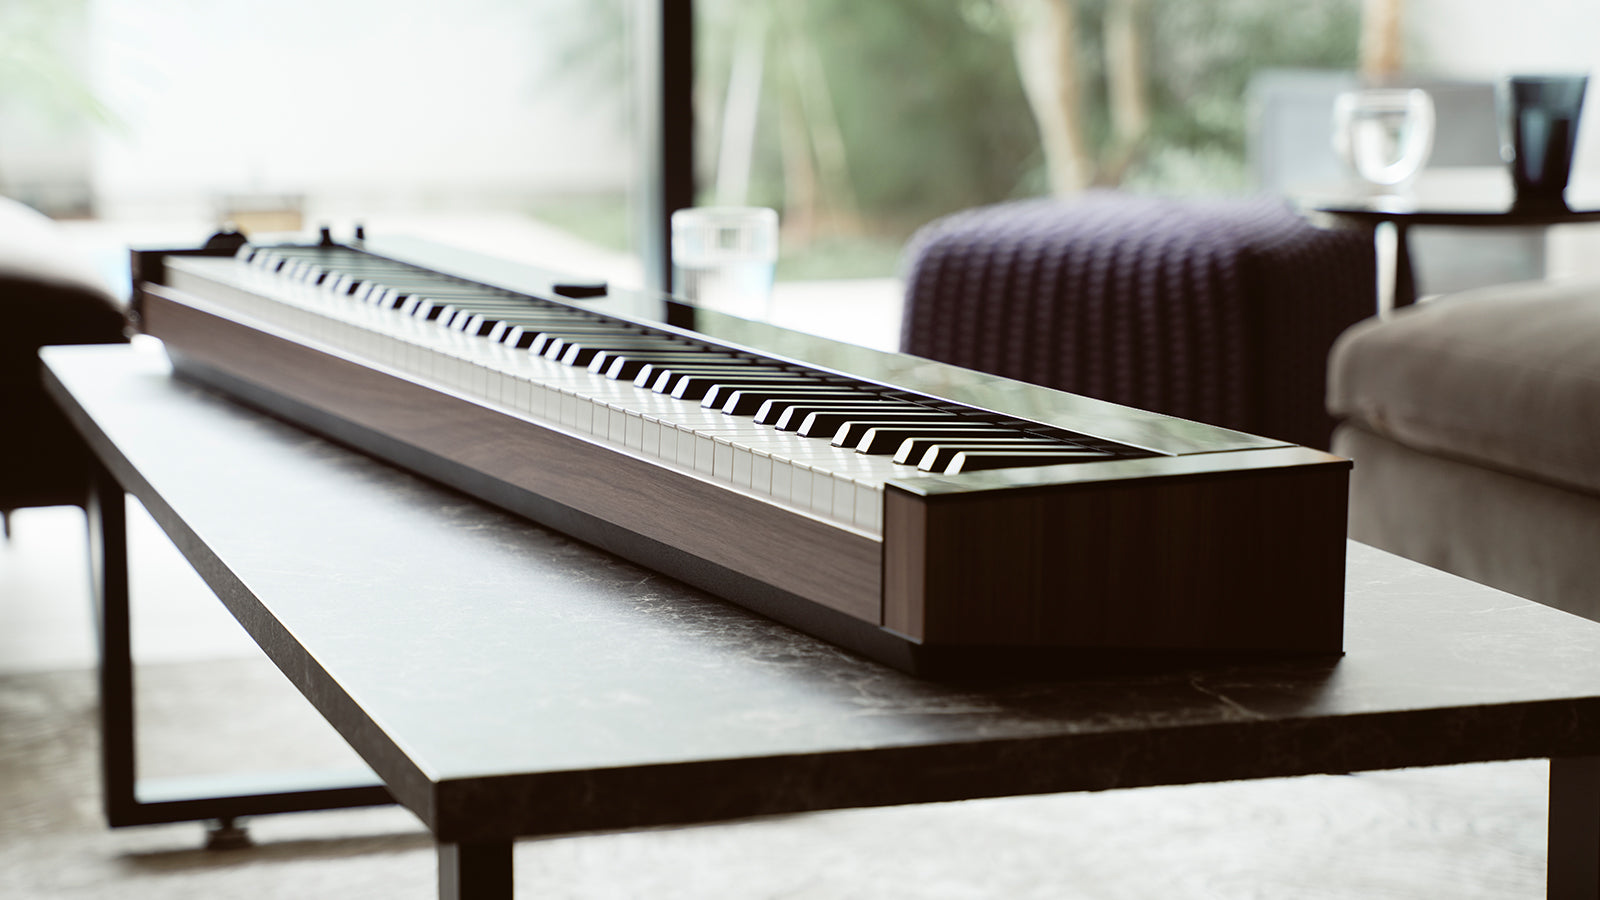 A Casio portable piano on a coffee table